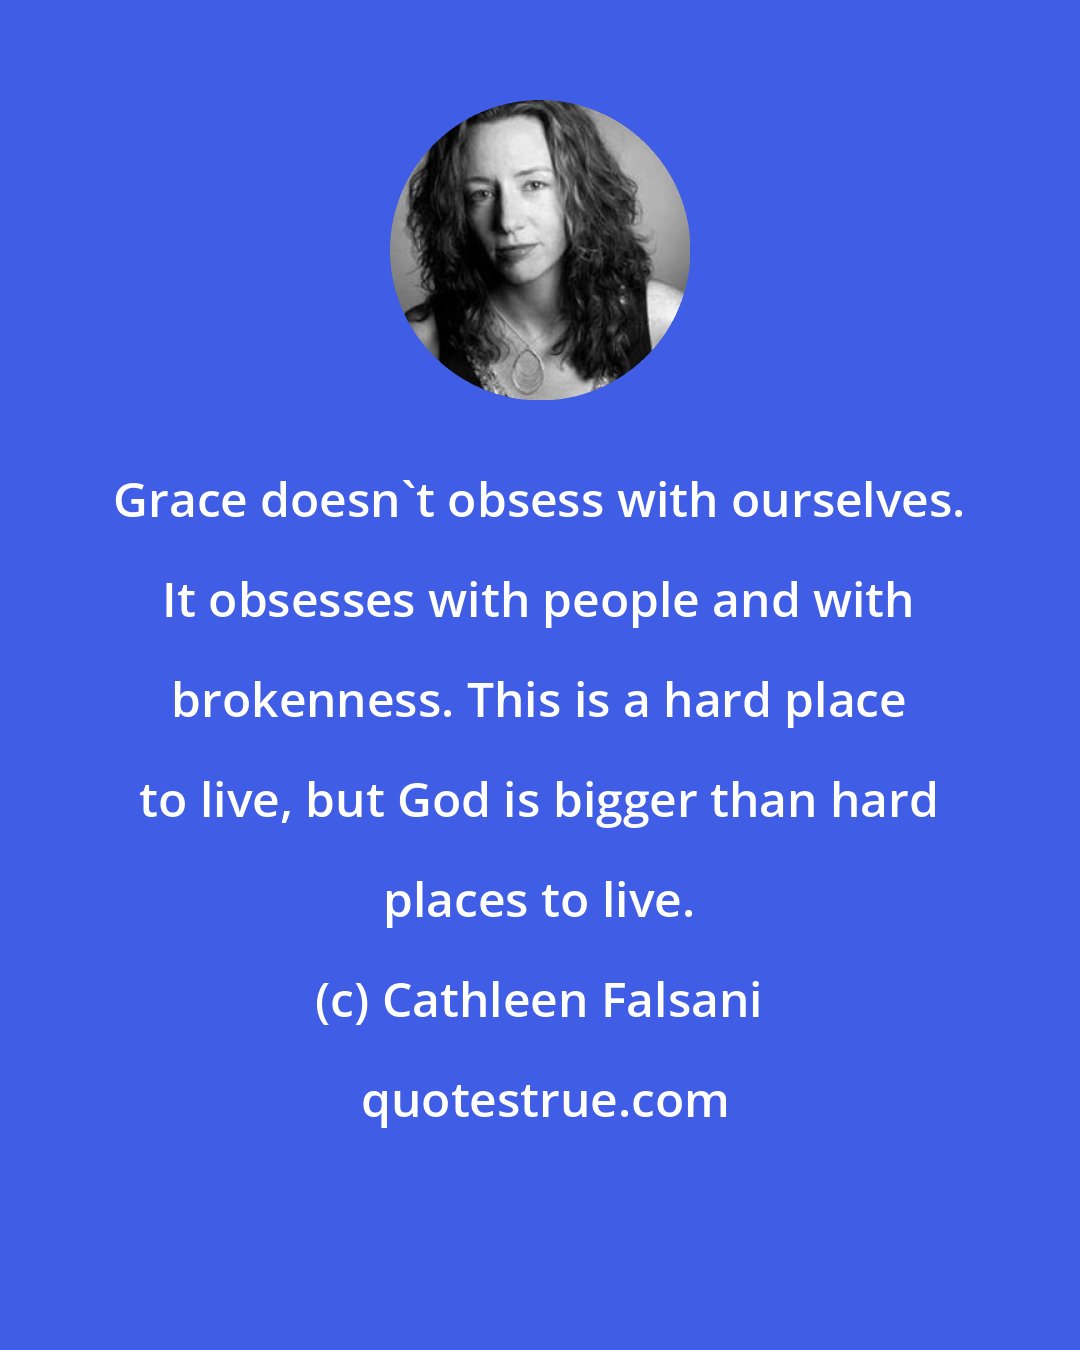 Cathleen Falsani: Grace doesn't obsess with ourselves. It obsesses with people and with brokenness. This is a hard place to live, but God is bigger than hard places to live.